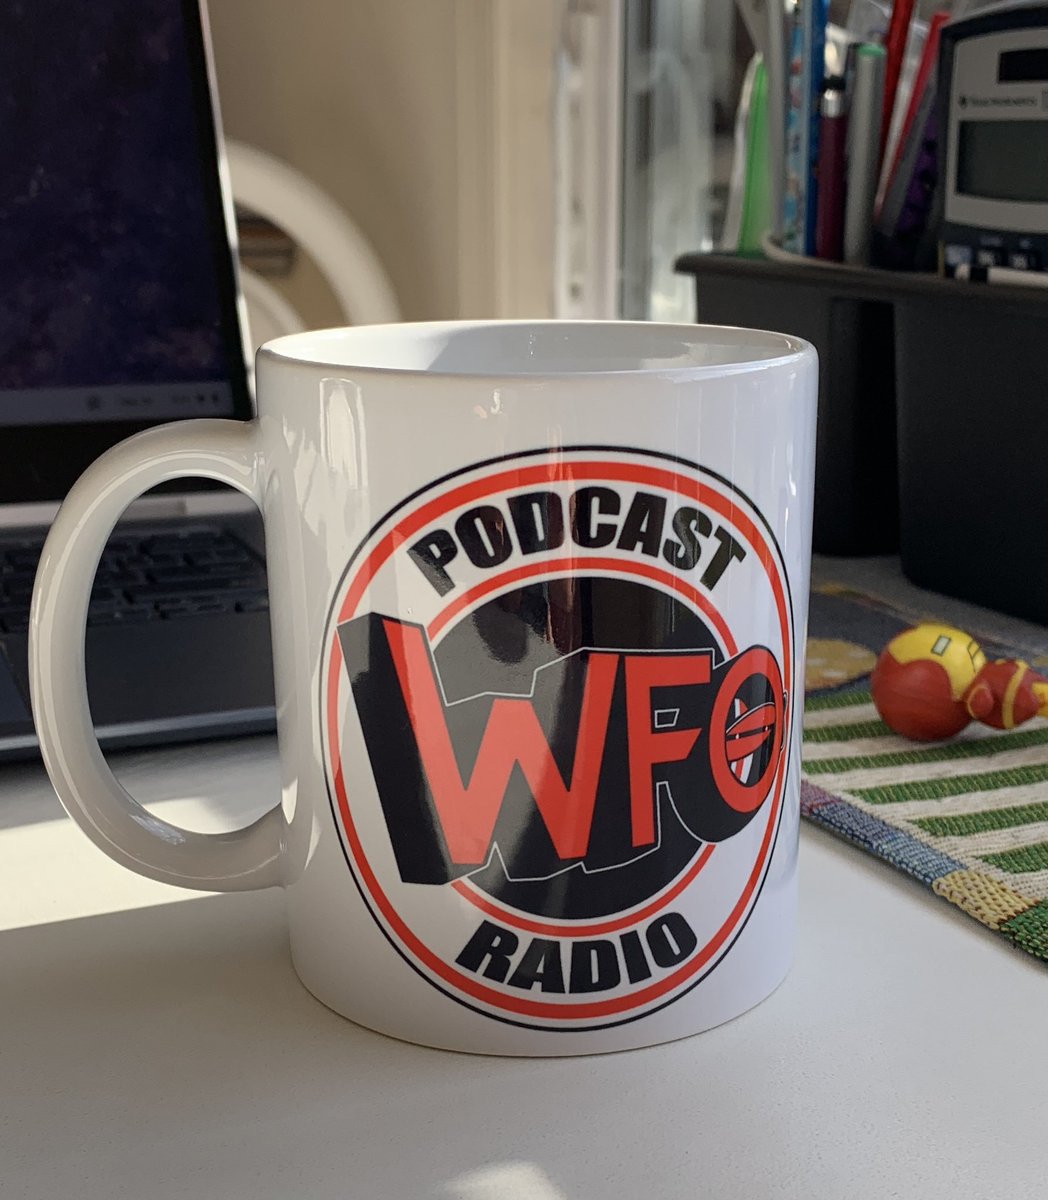 Time to start the day the @WFORadio way! It’s a day of getting organized for Easter 🐣🐰But first a cup of coffee or 2. ☕️☕️Wishing everyone a wonderful Wednesday! #BestPodcast